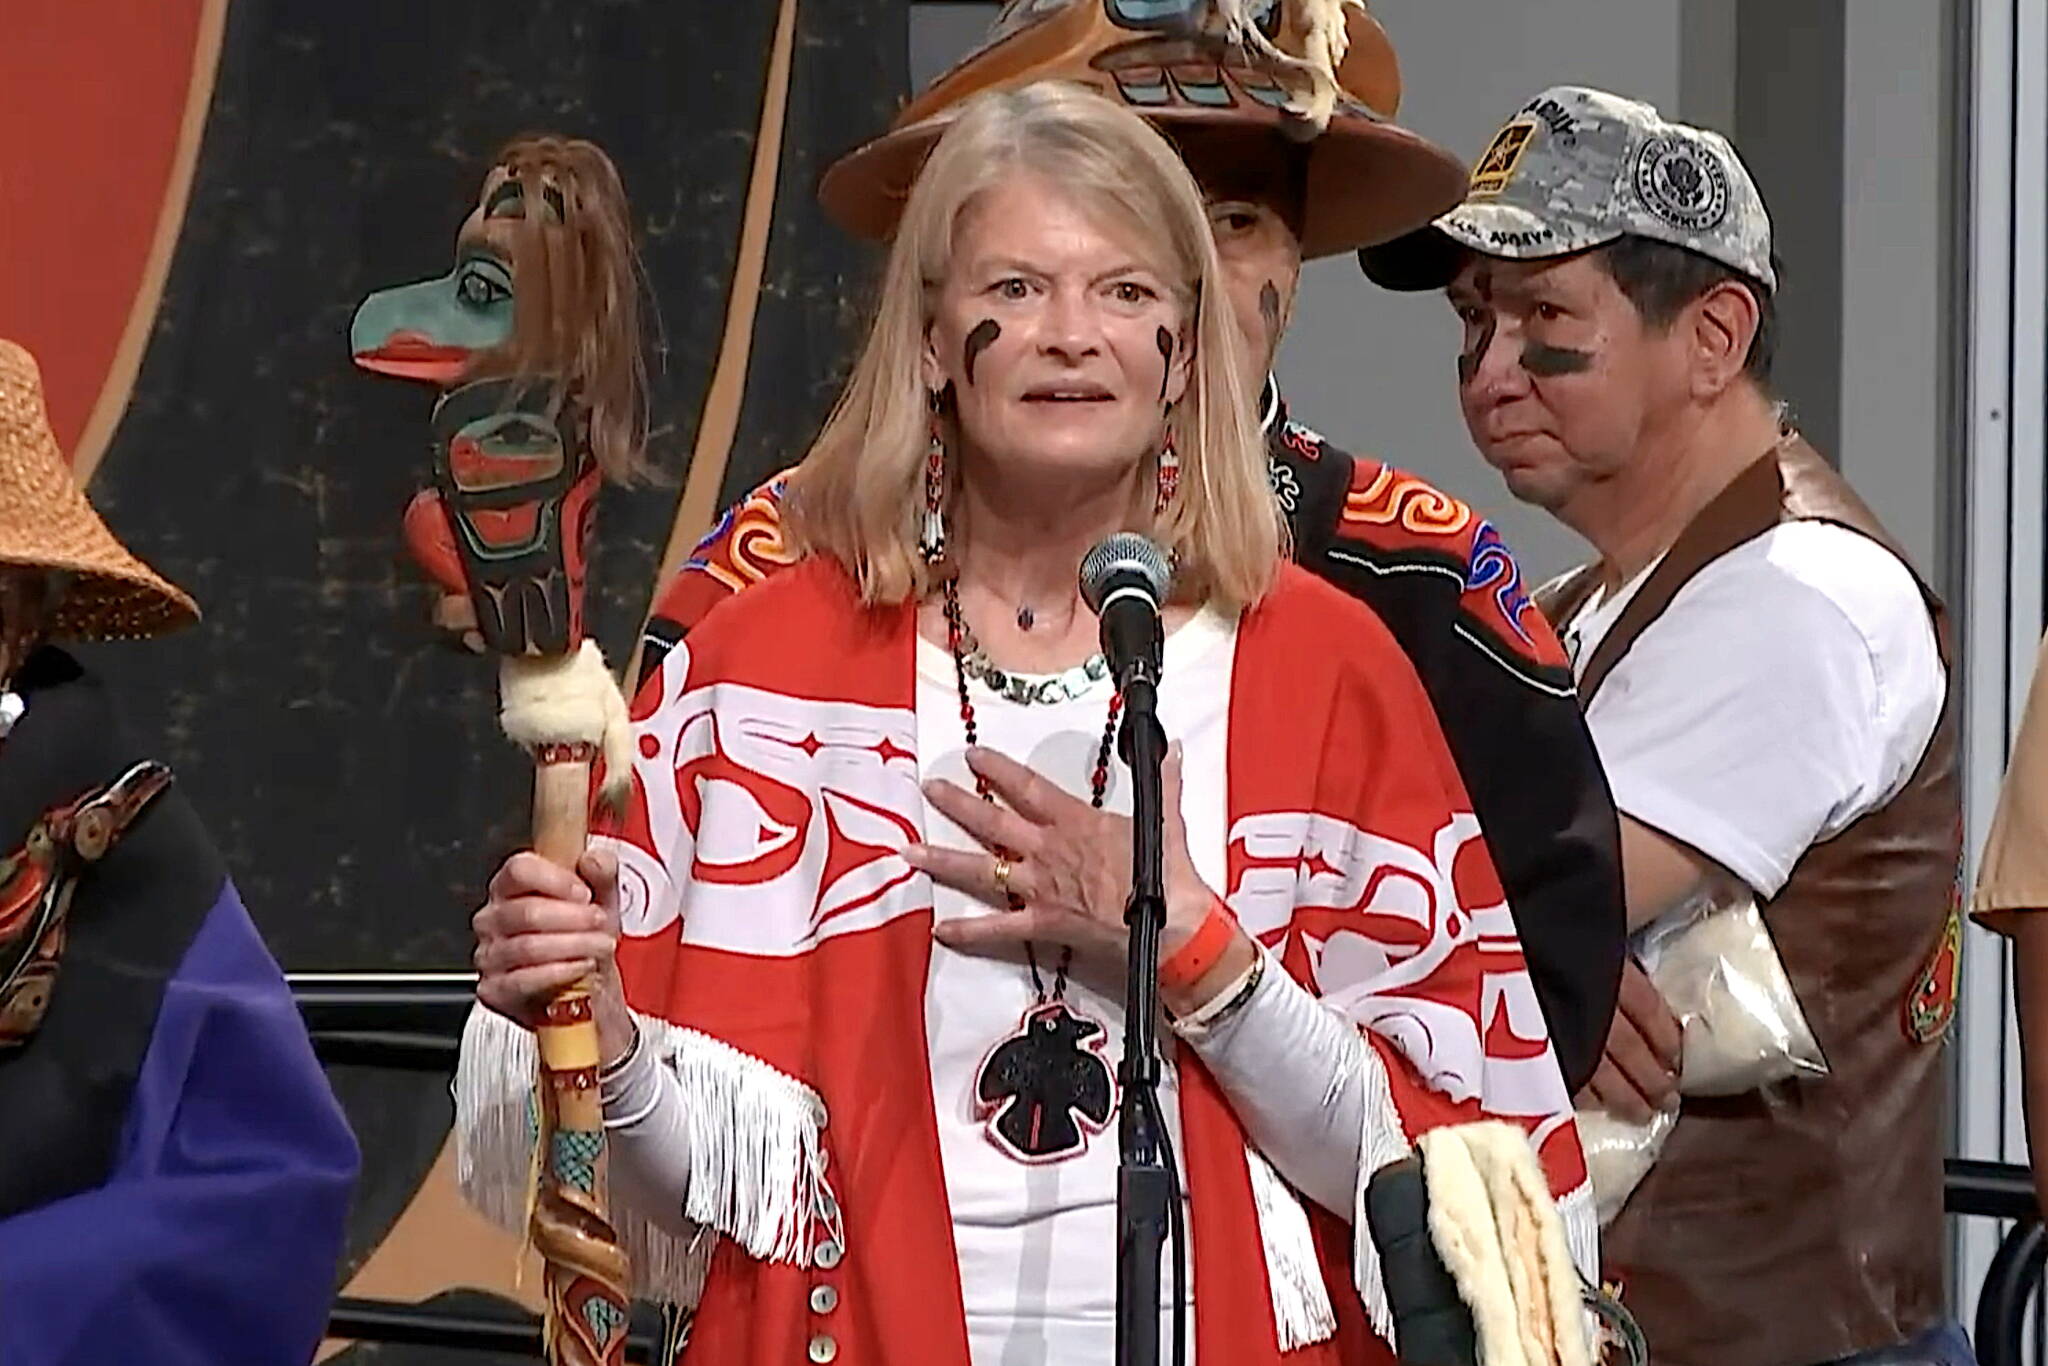 U.S. Sen. Lisa Murkowski announces during Celebration on Friday at Centennial Hall the U.S. Navy will be apologizing to “the people of Angoon” for the 1882 bombardment that destroyed the Tlingit village. (Screenshot from video by Sealaska Heritage Institute)